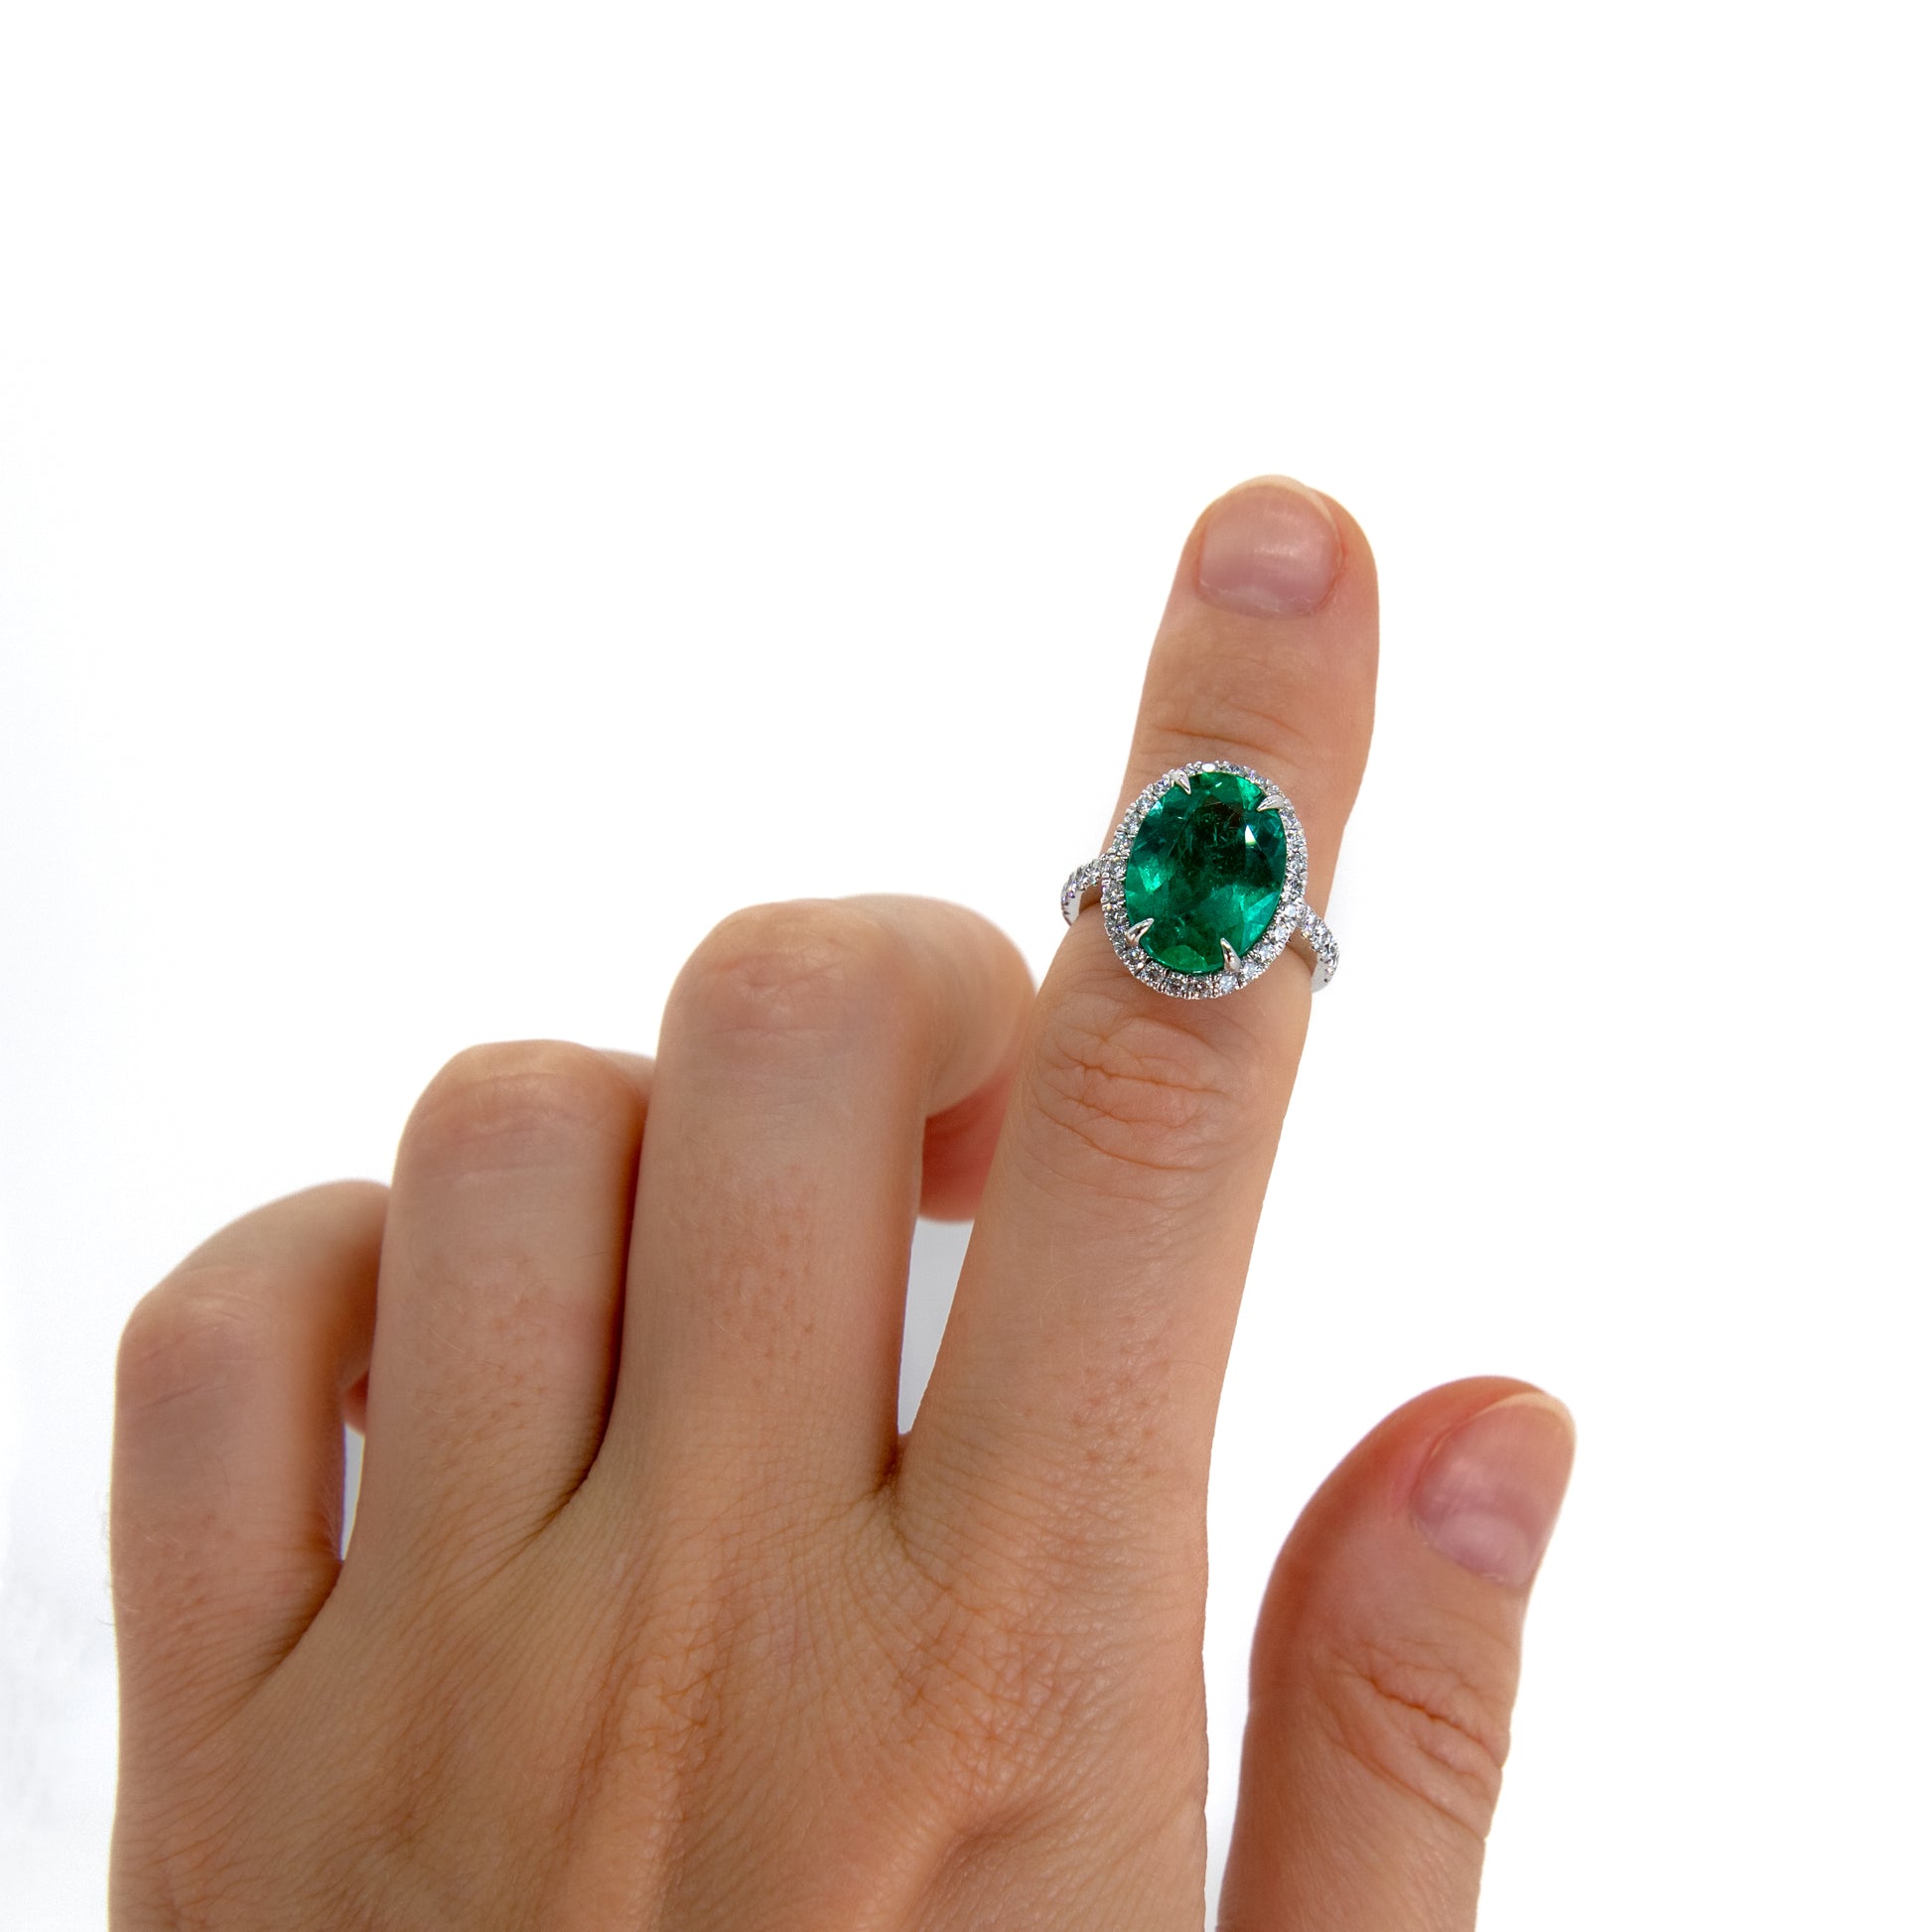 emerald and diamond ring, emerald engagement ring, emerald ring, diamond band, diamond ring, hong kong engagement ring, zambian emerald, cocktail ring, delicate emerald ring, colombian emerald ring, hong kong engagement ring, 翡翠戒指, 祖母绿戒指, 香港珠宝, 订婚戒指, 钻戒, 钻石,  古董钻石, emerald and yellow diamond ring, yellow diamonds, yellow diamond, colour diamond, muzo emerald